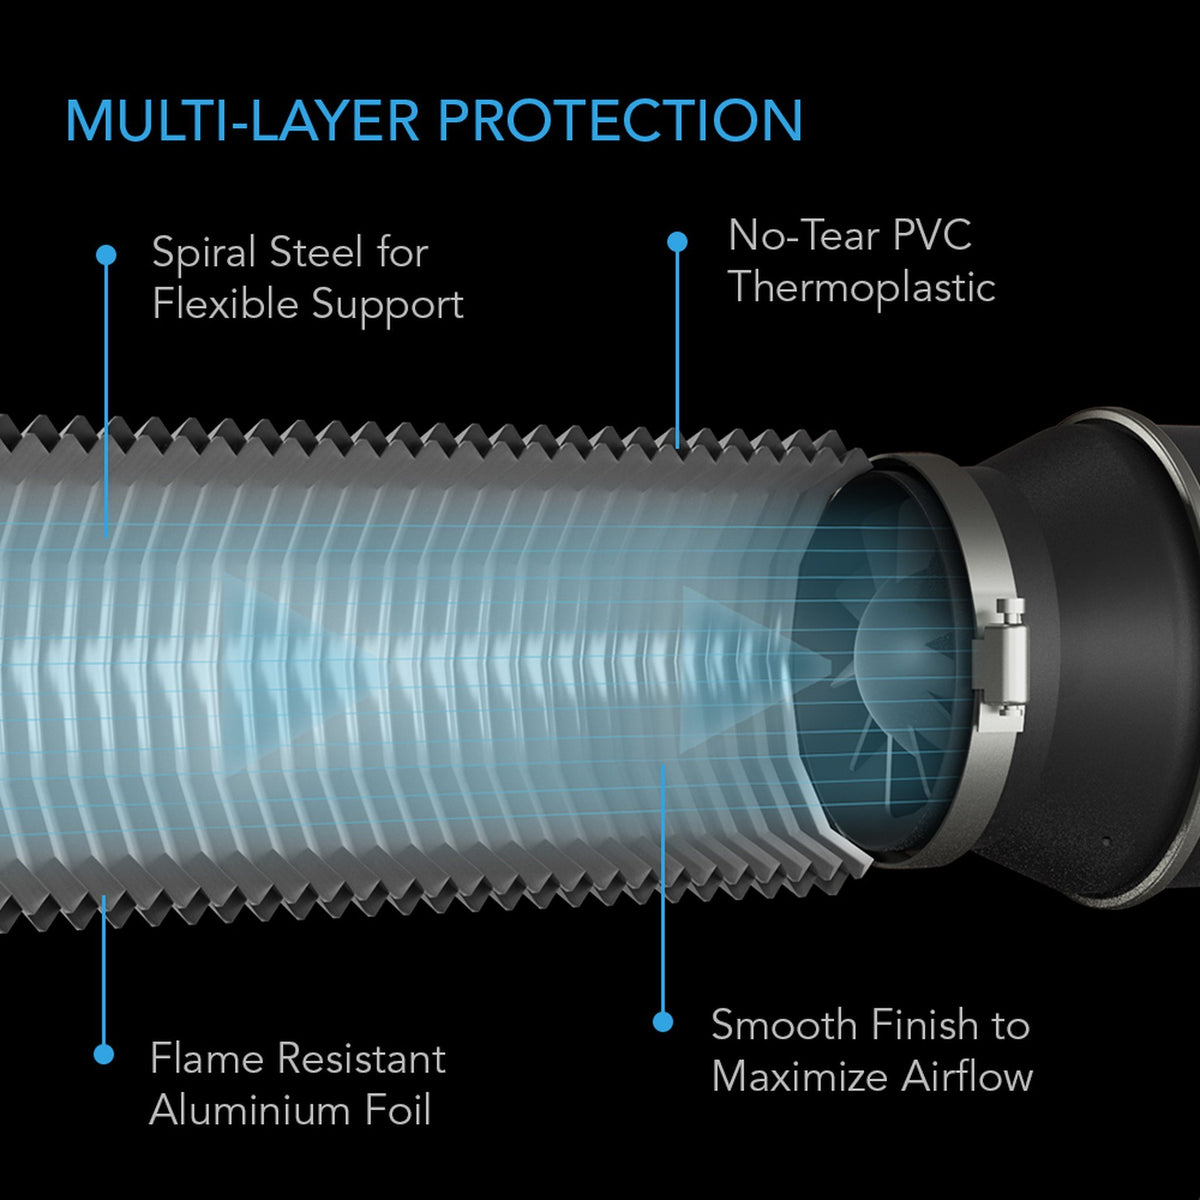 Muti-Layer protection ducting